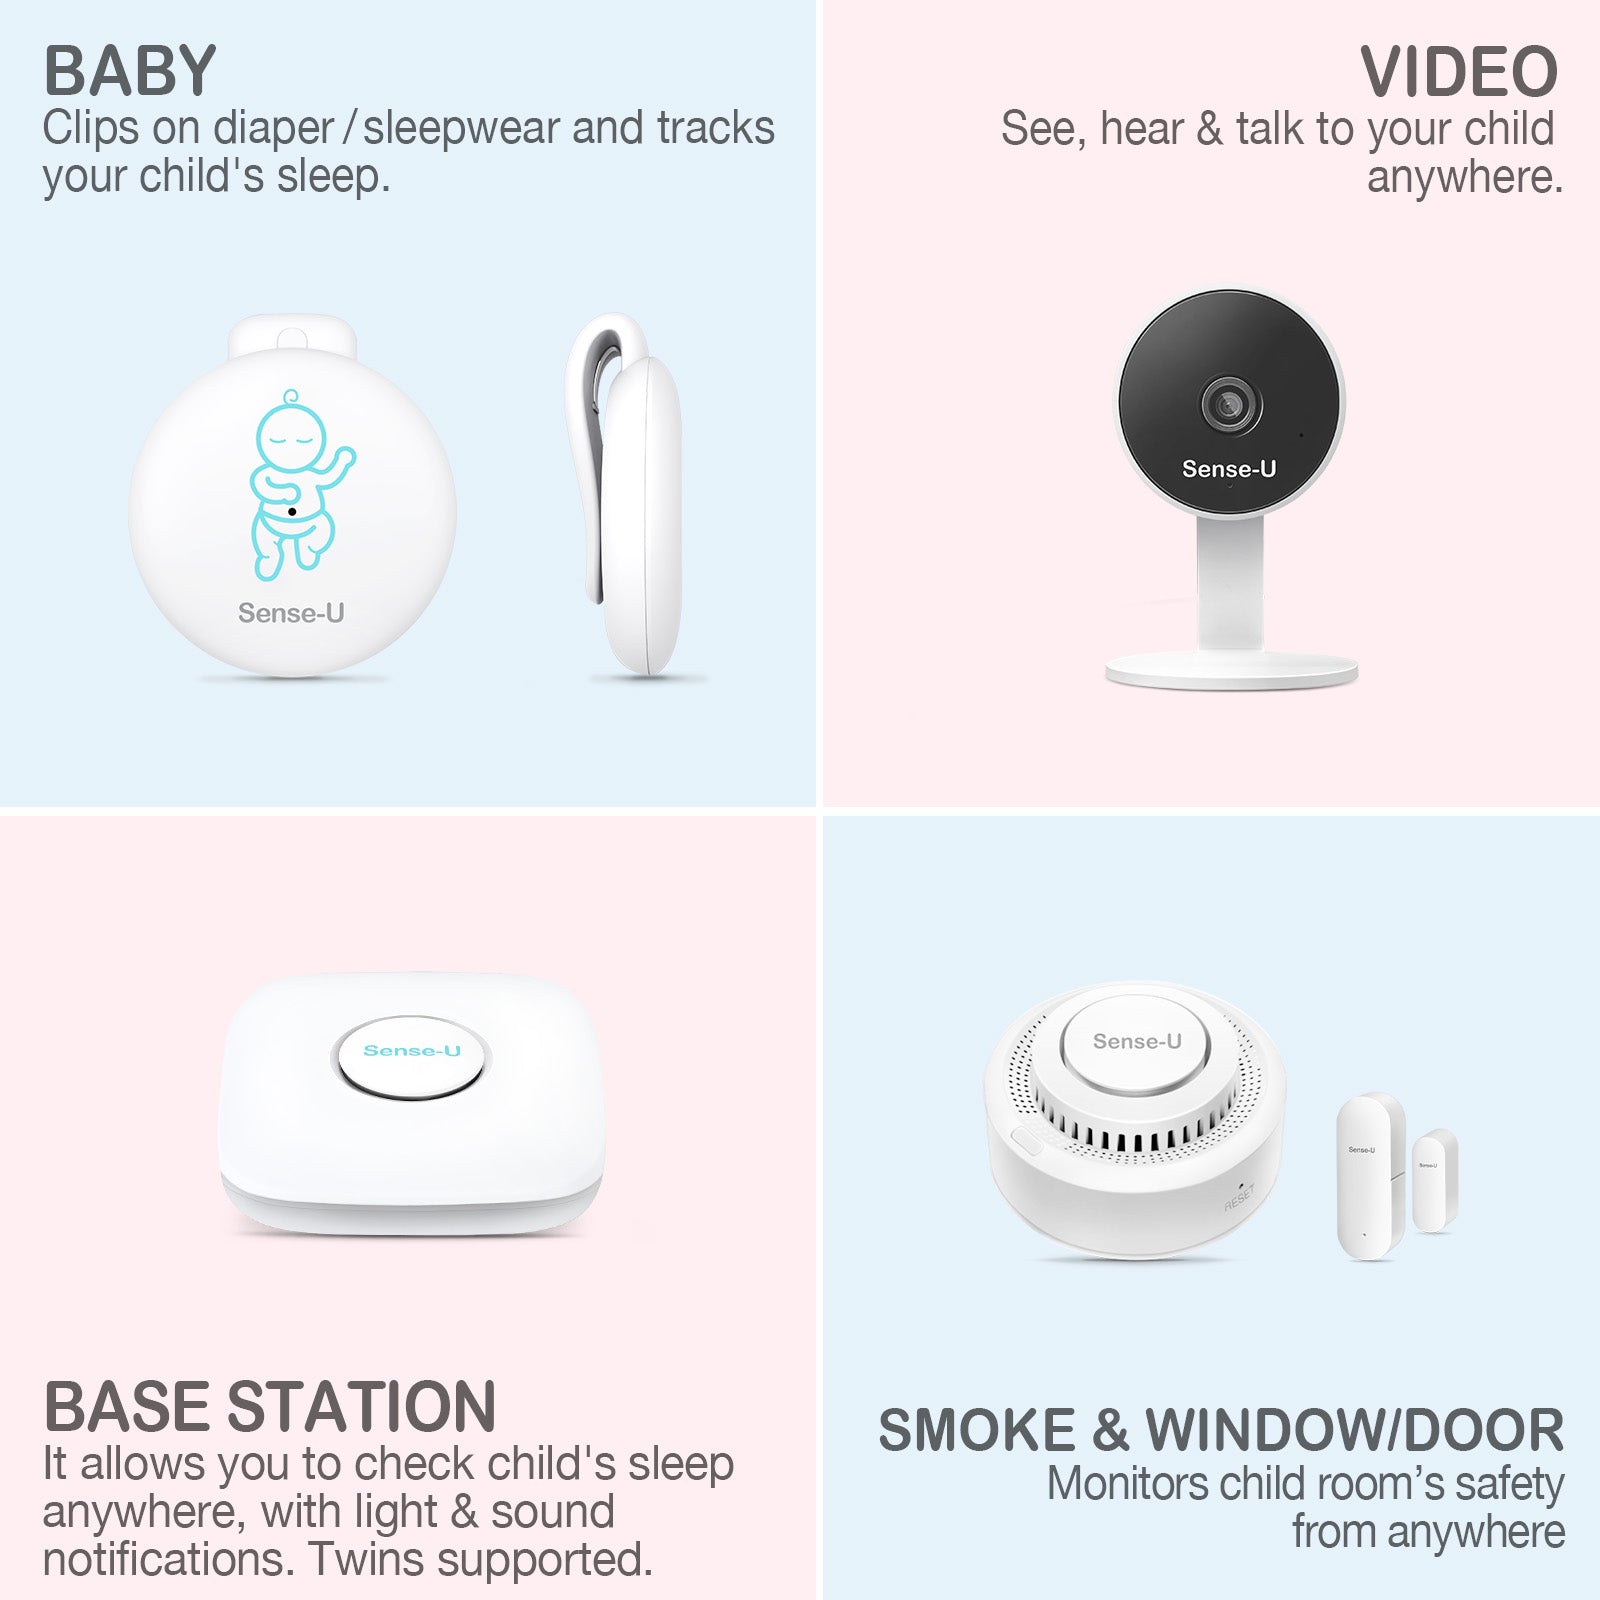 Sense-U® Complete: The most complete baby monitor system